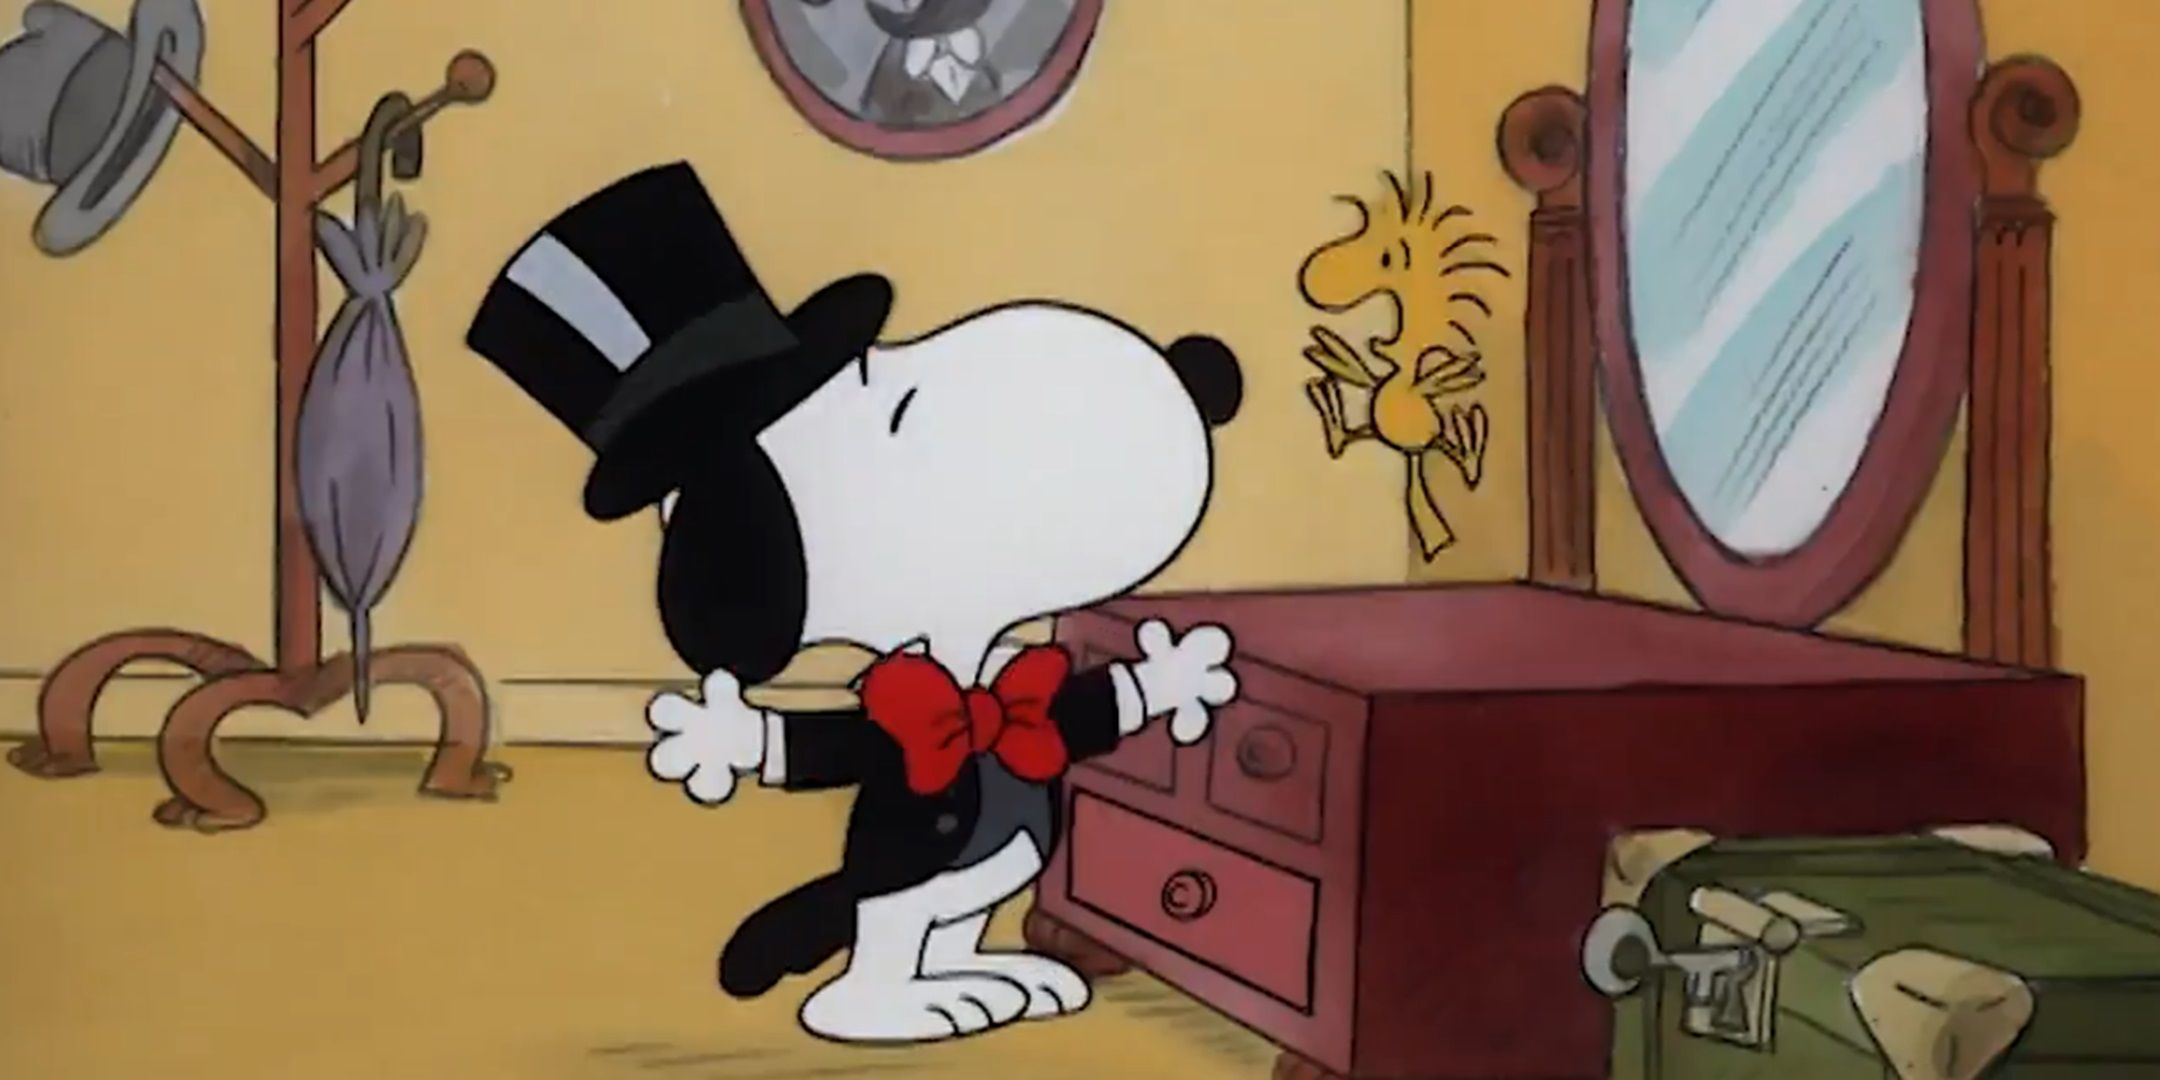 Snoopy wearing a tuxedo and top hat